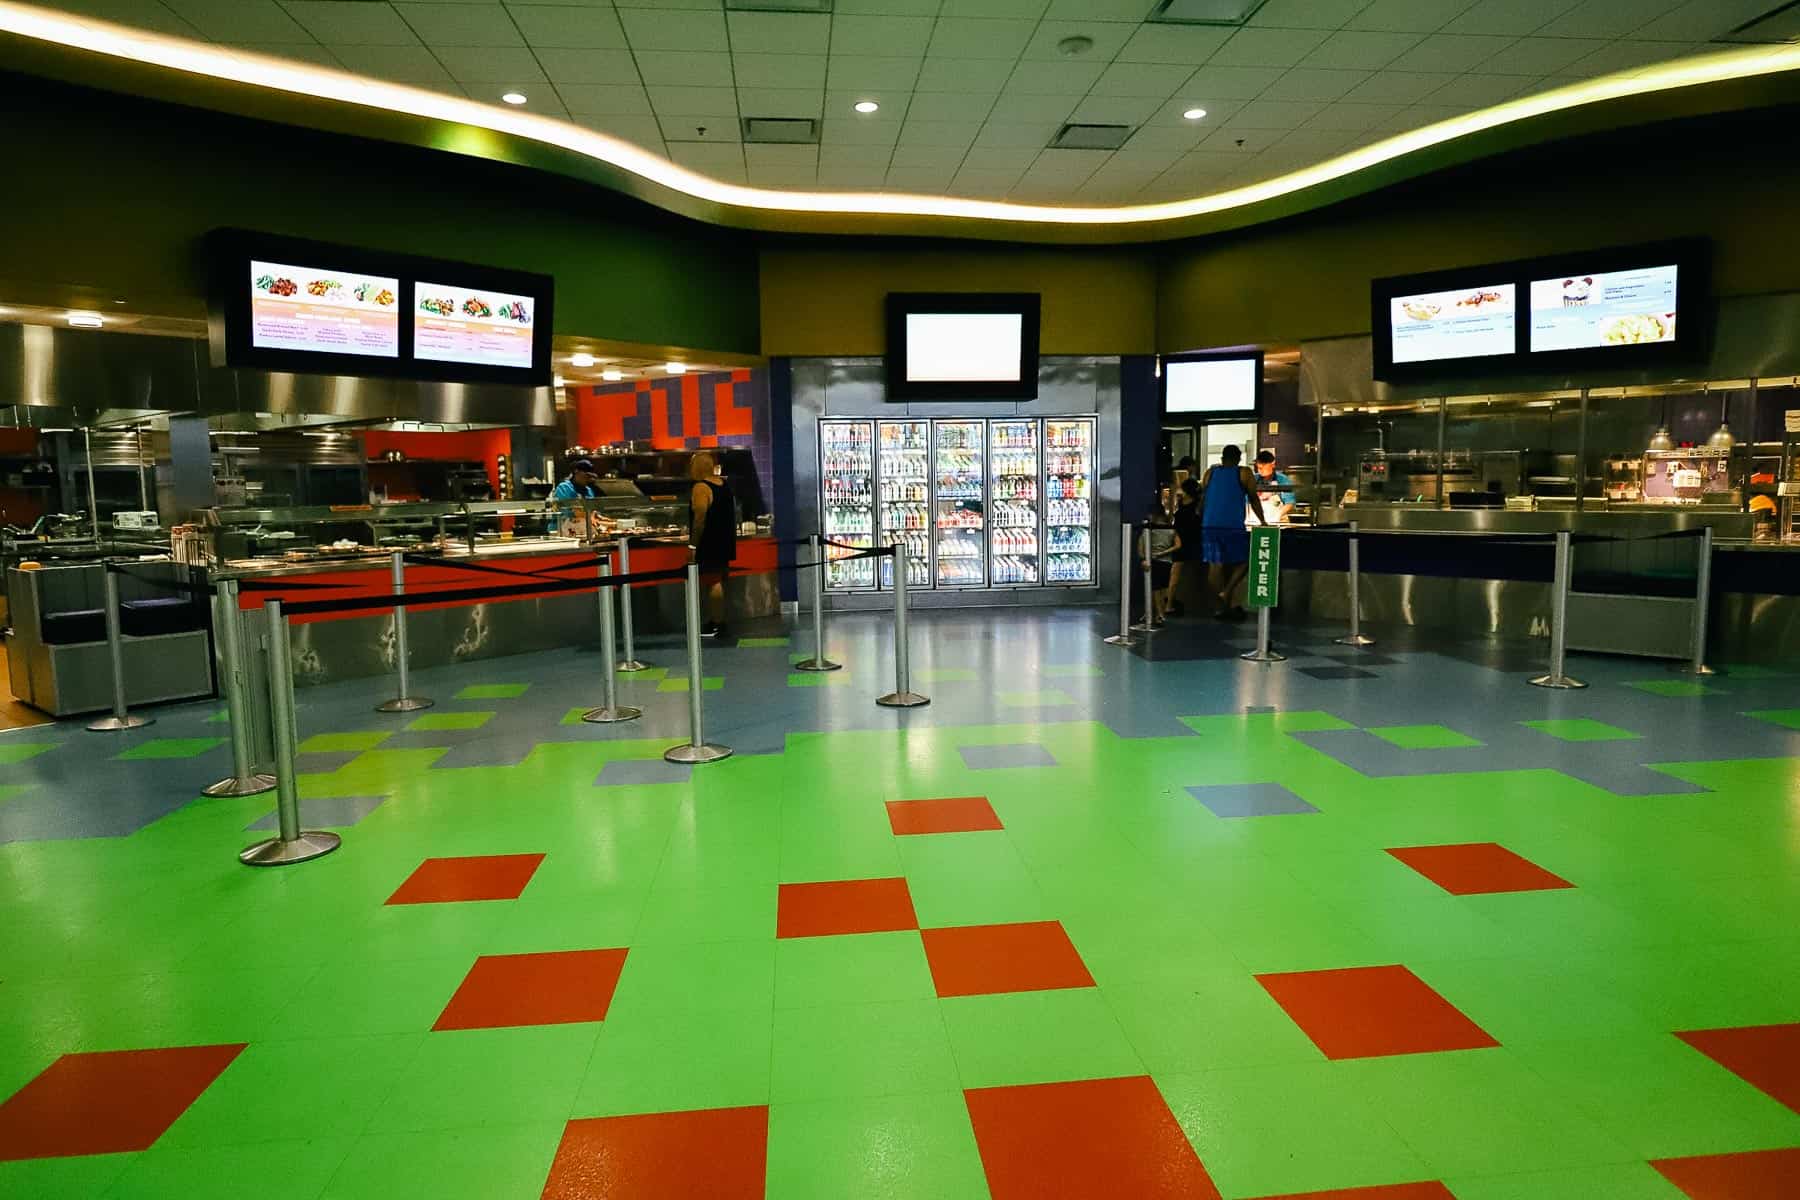 interior food court area with stations offering various cuisines 